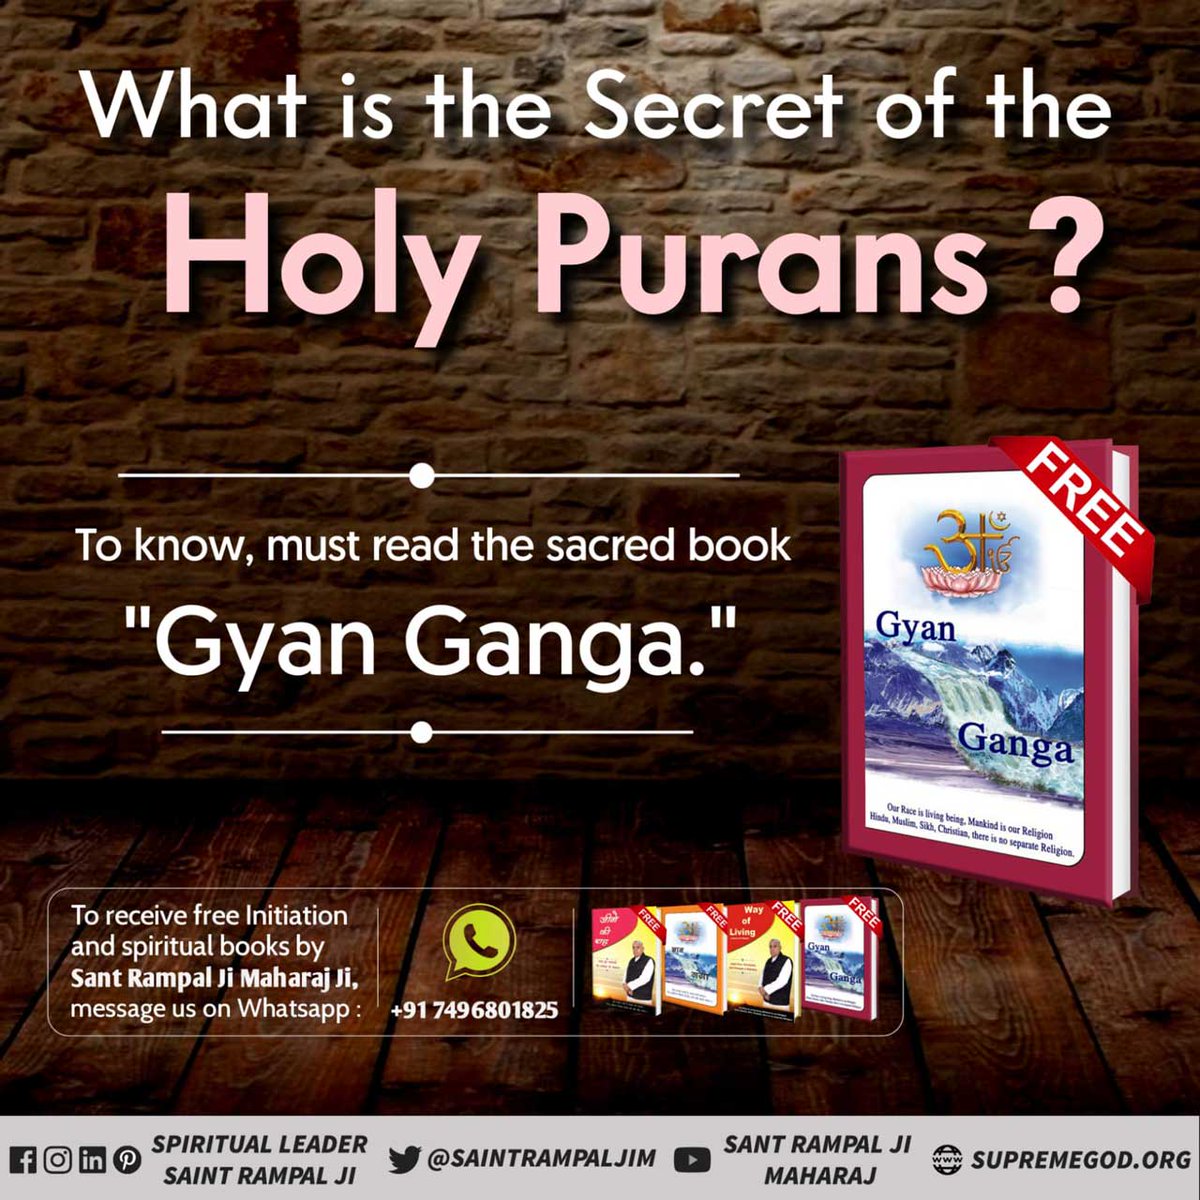 #GodNightWednesday What is the Secret of the Holy Purans? For More Information, must read the previous book 'Gyan Ganga'' #WednesdayMotivation